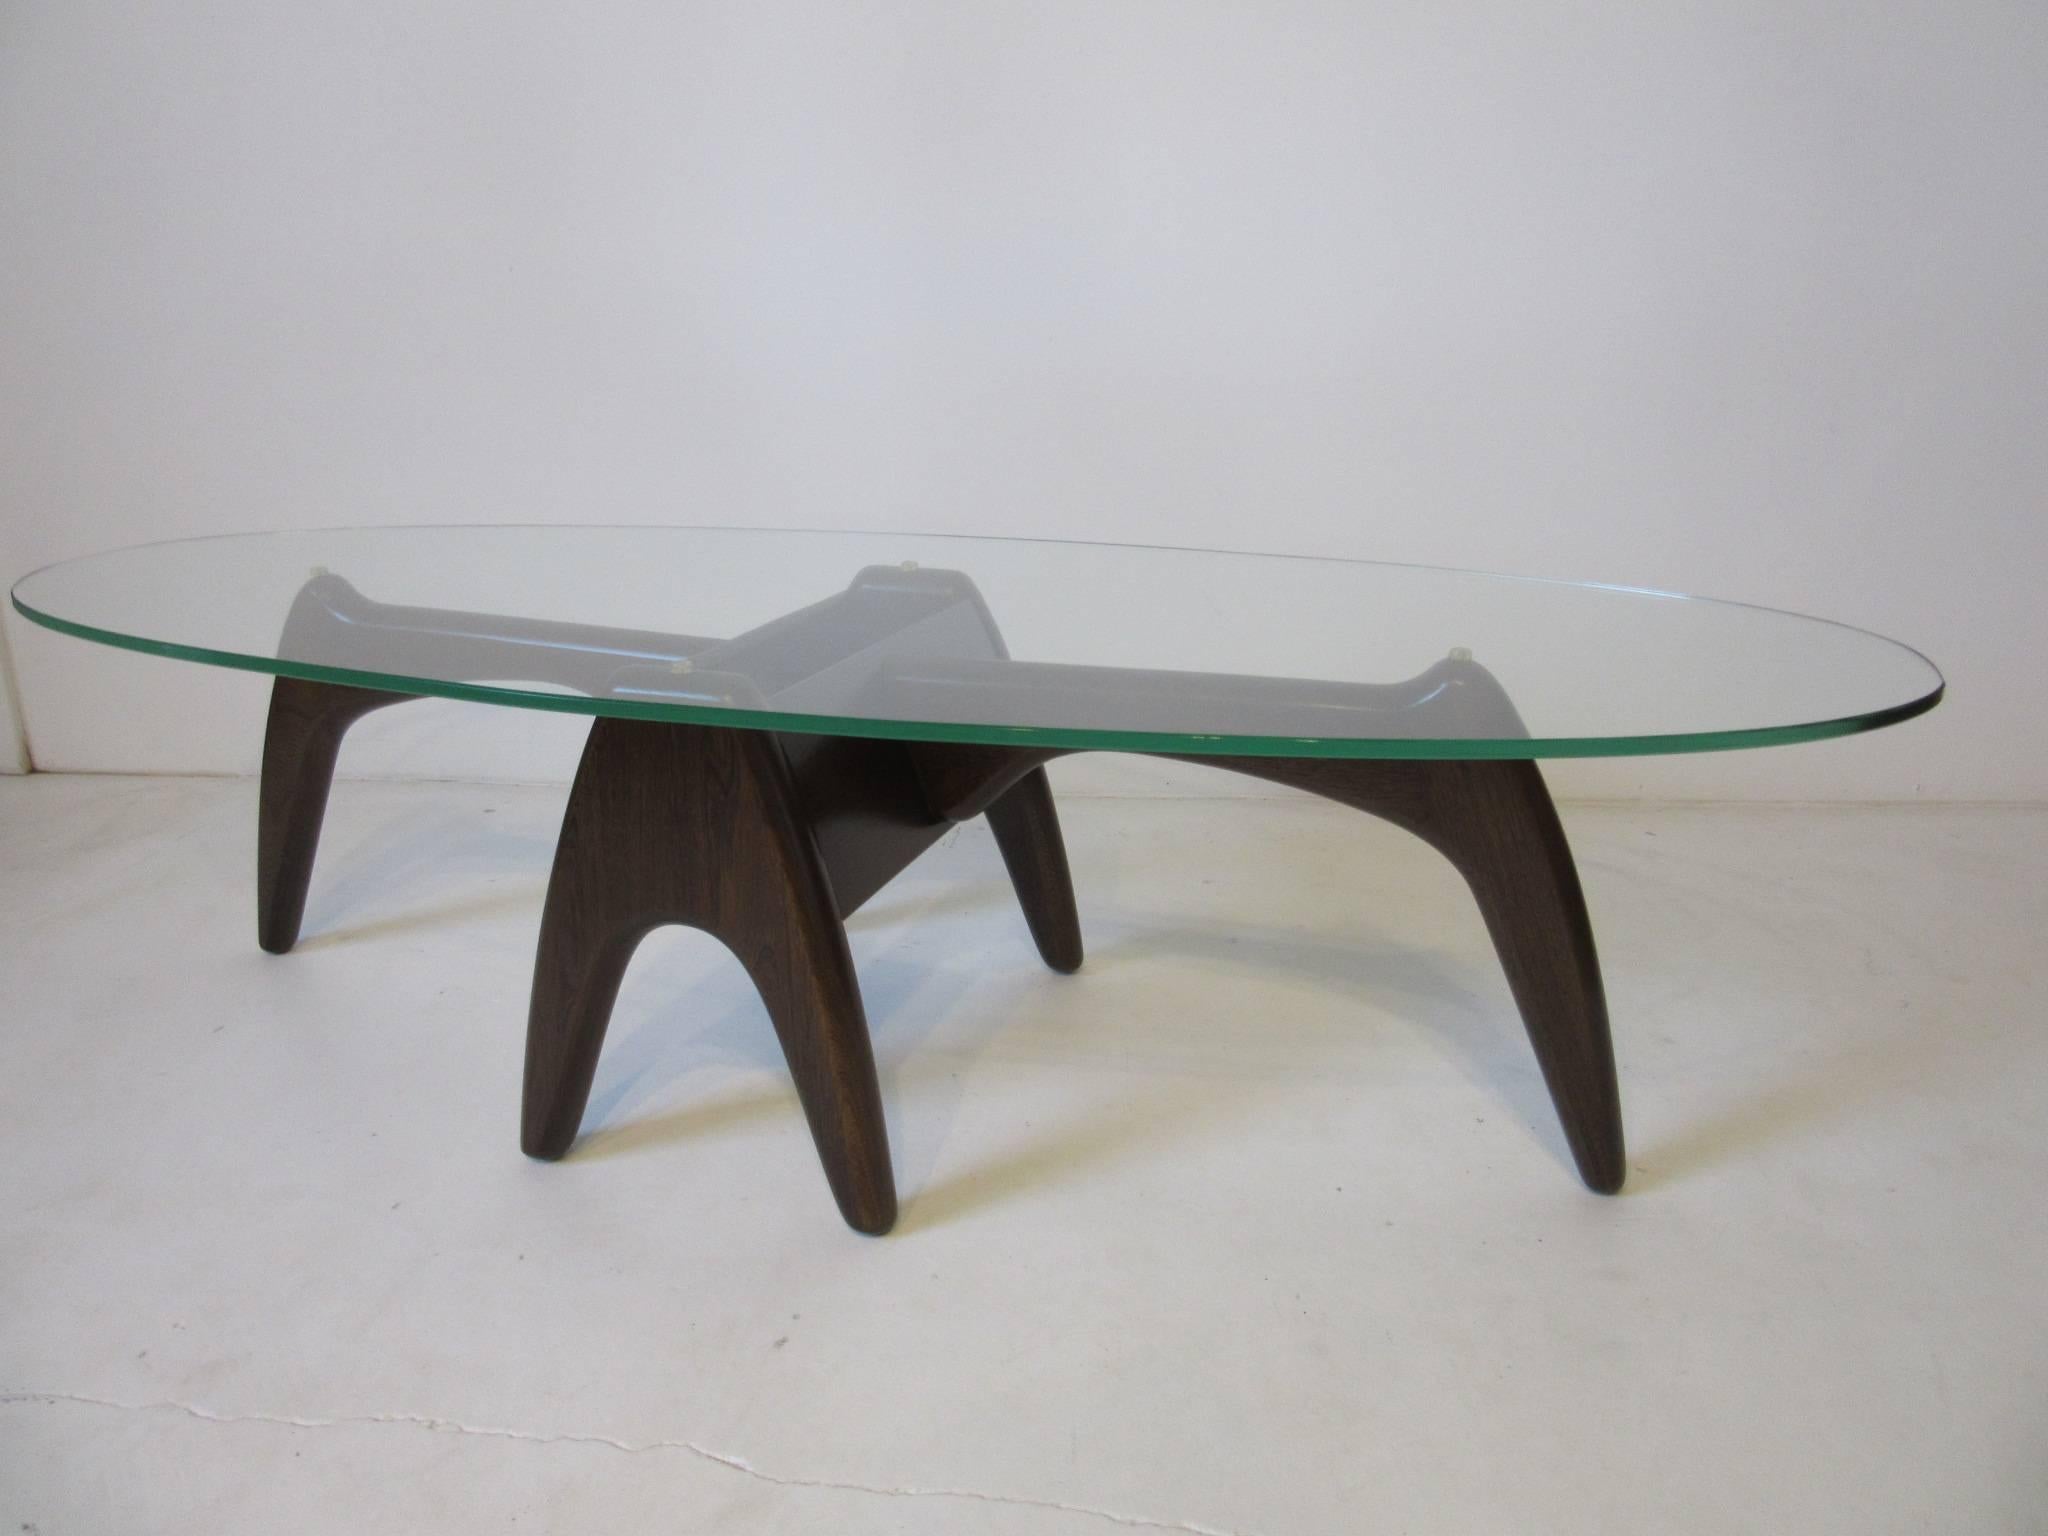 A dark walnut sculptural based coffee table with oval glass top.